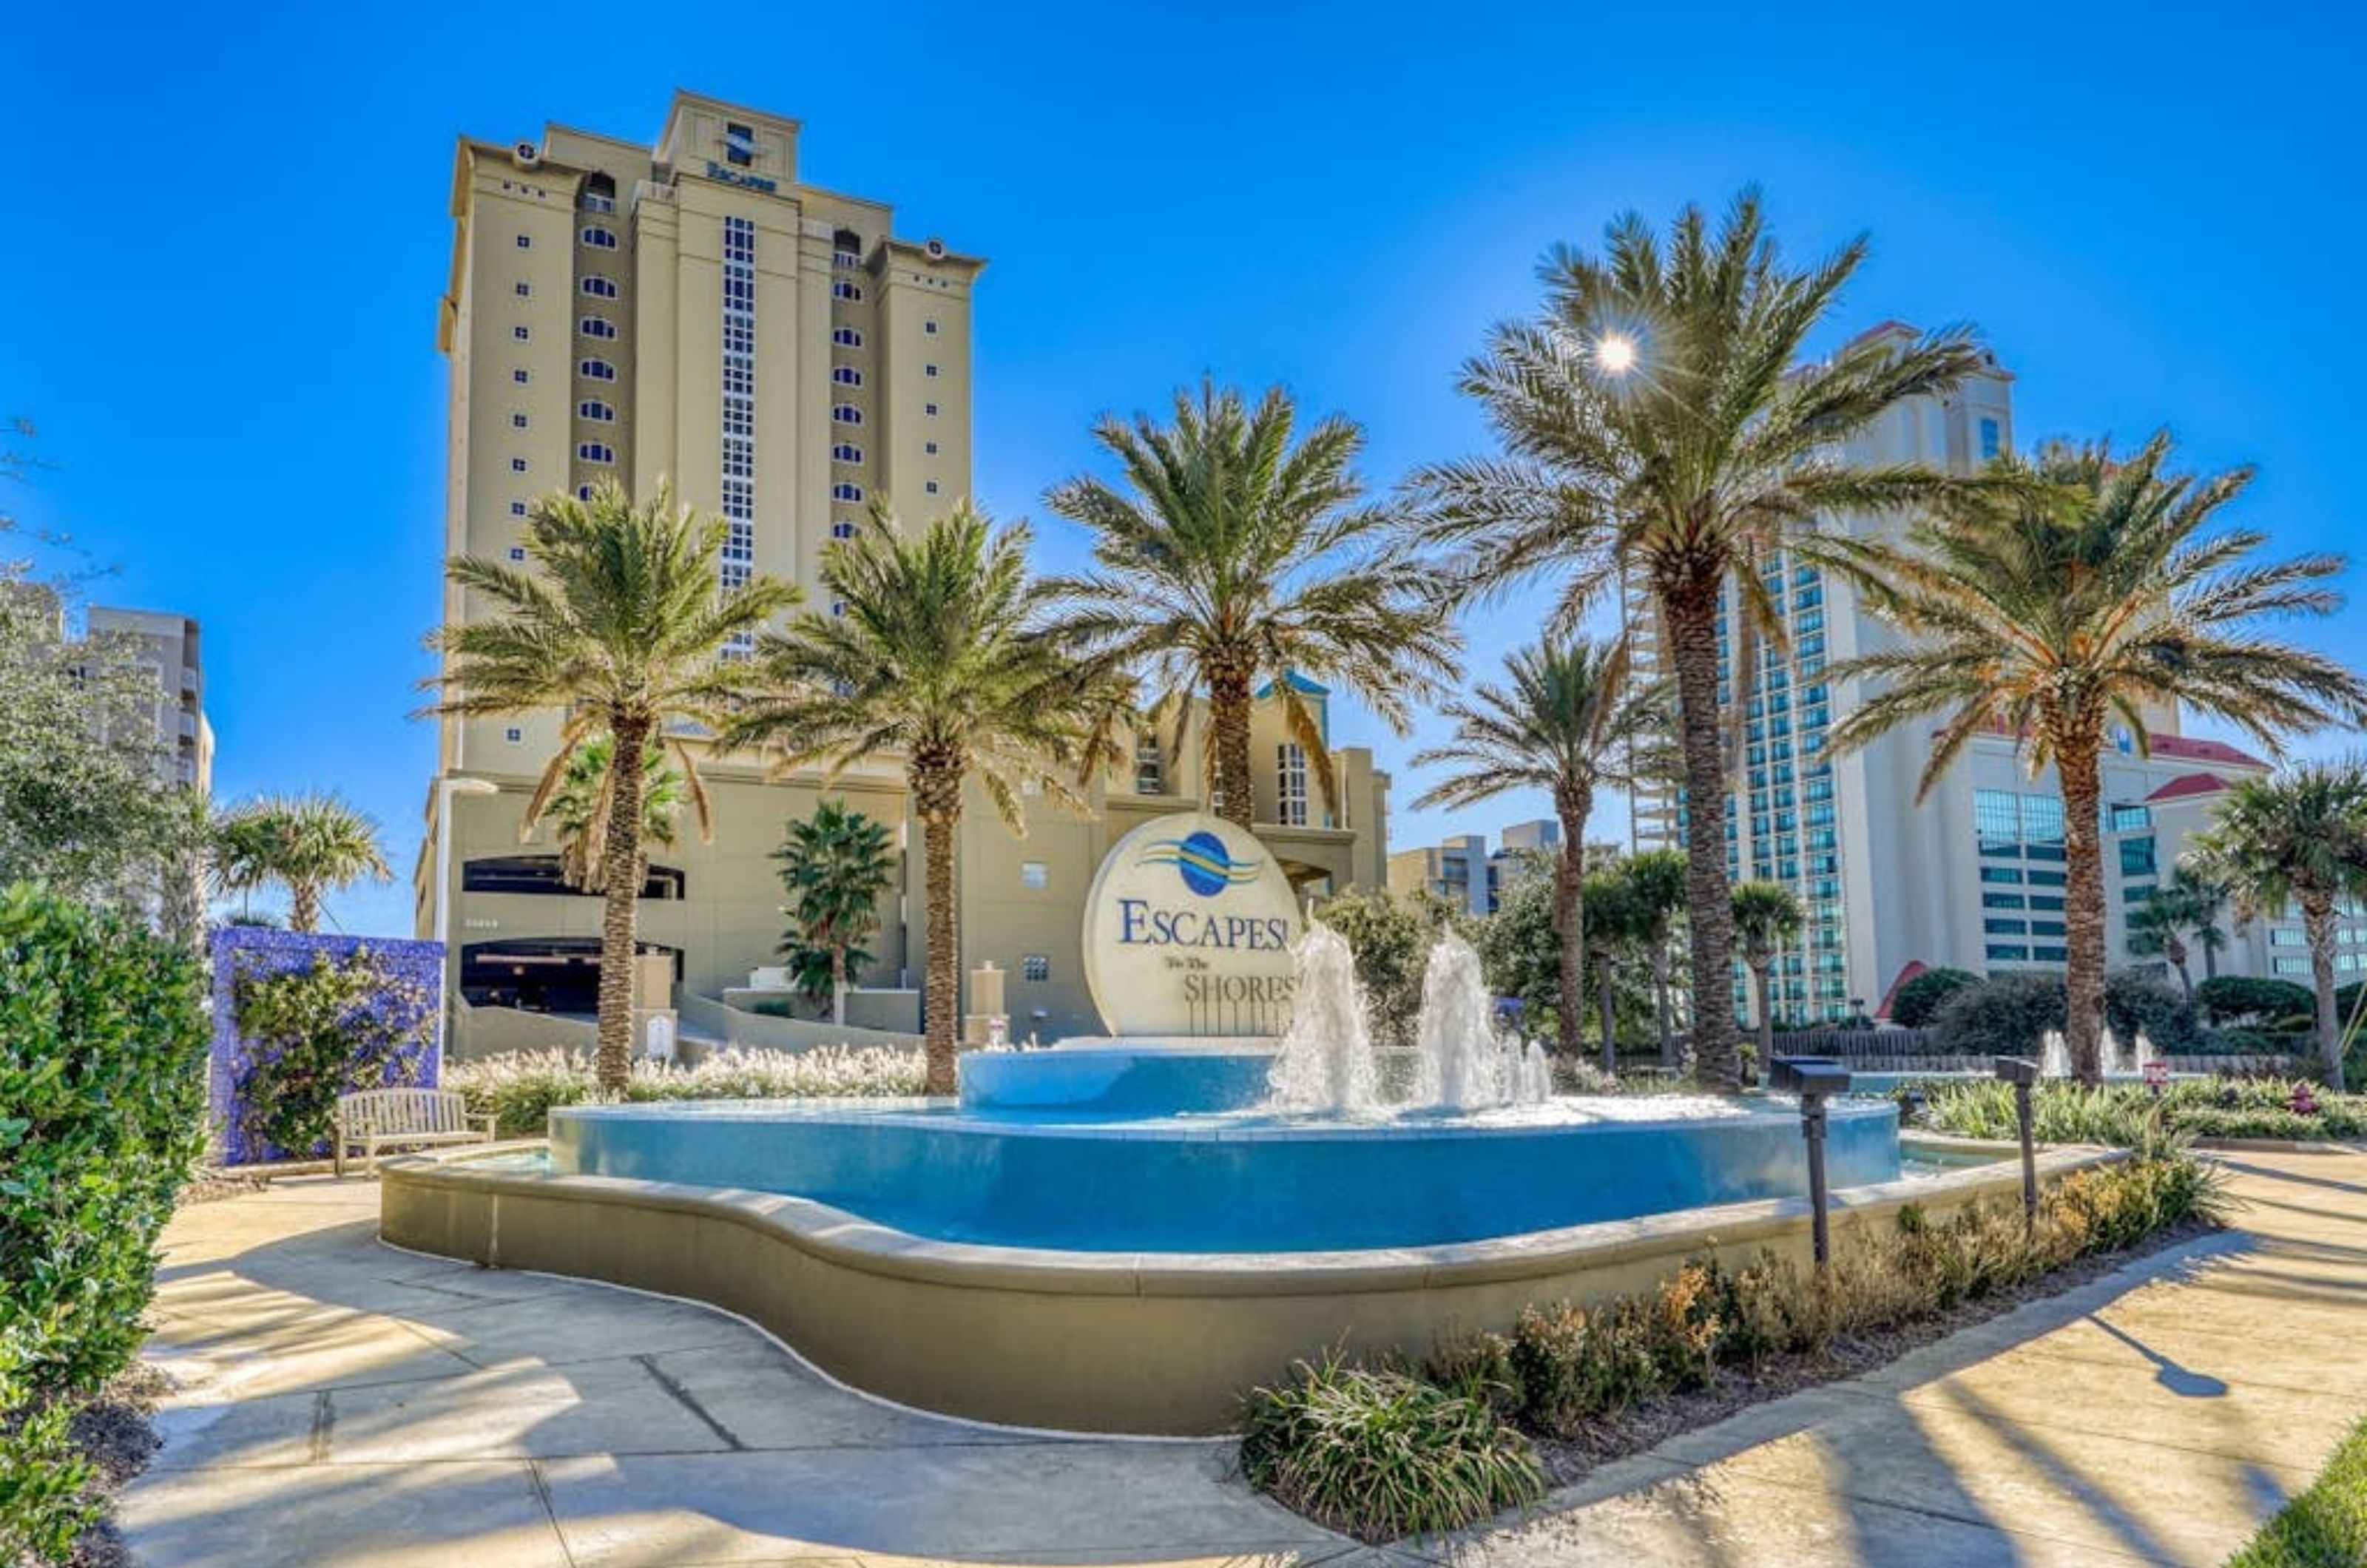 The waterfountain and palm trees in front of Escapes to the Shores in Orange Beach Alabama 